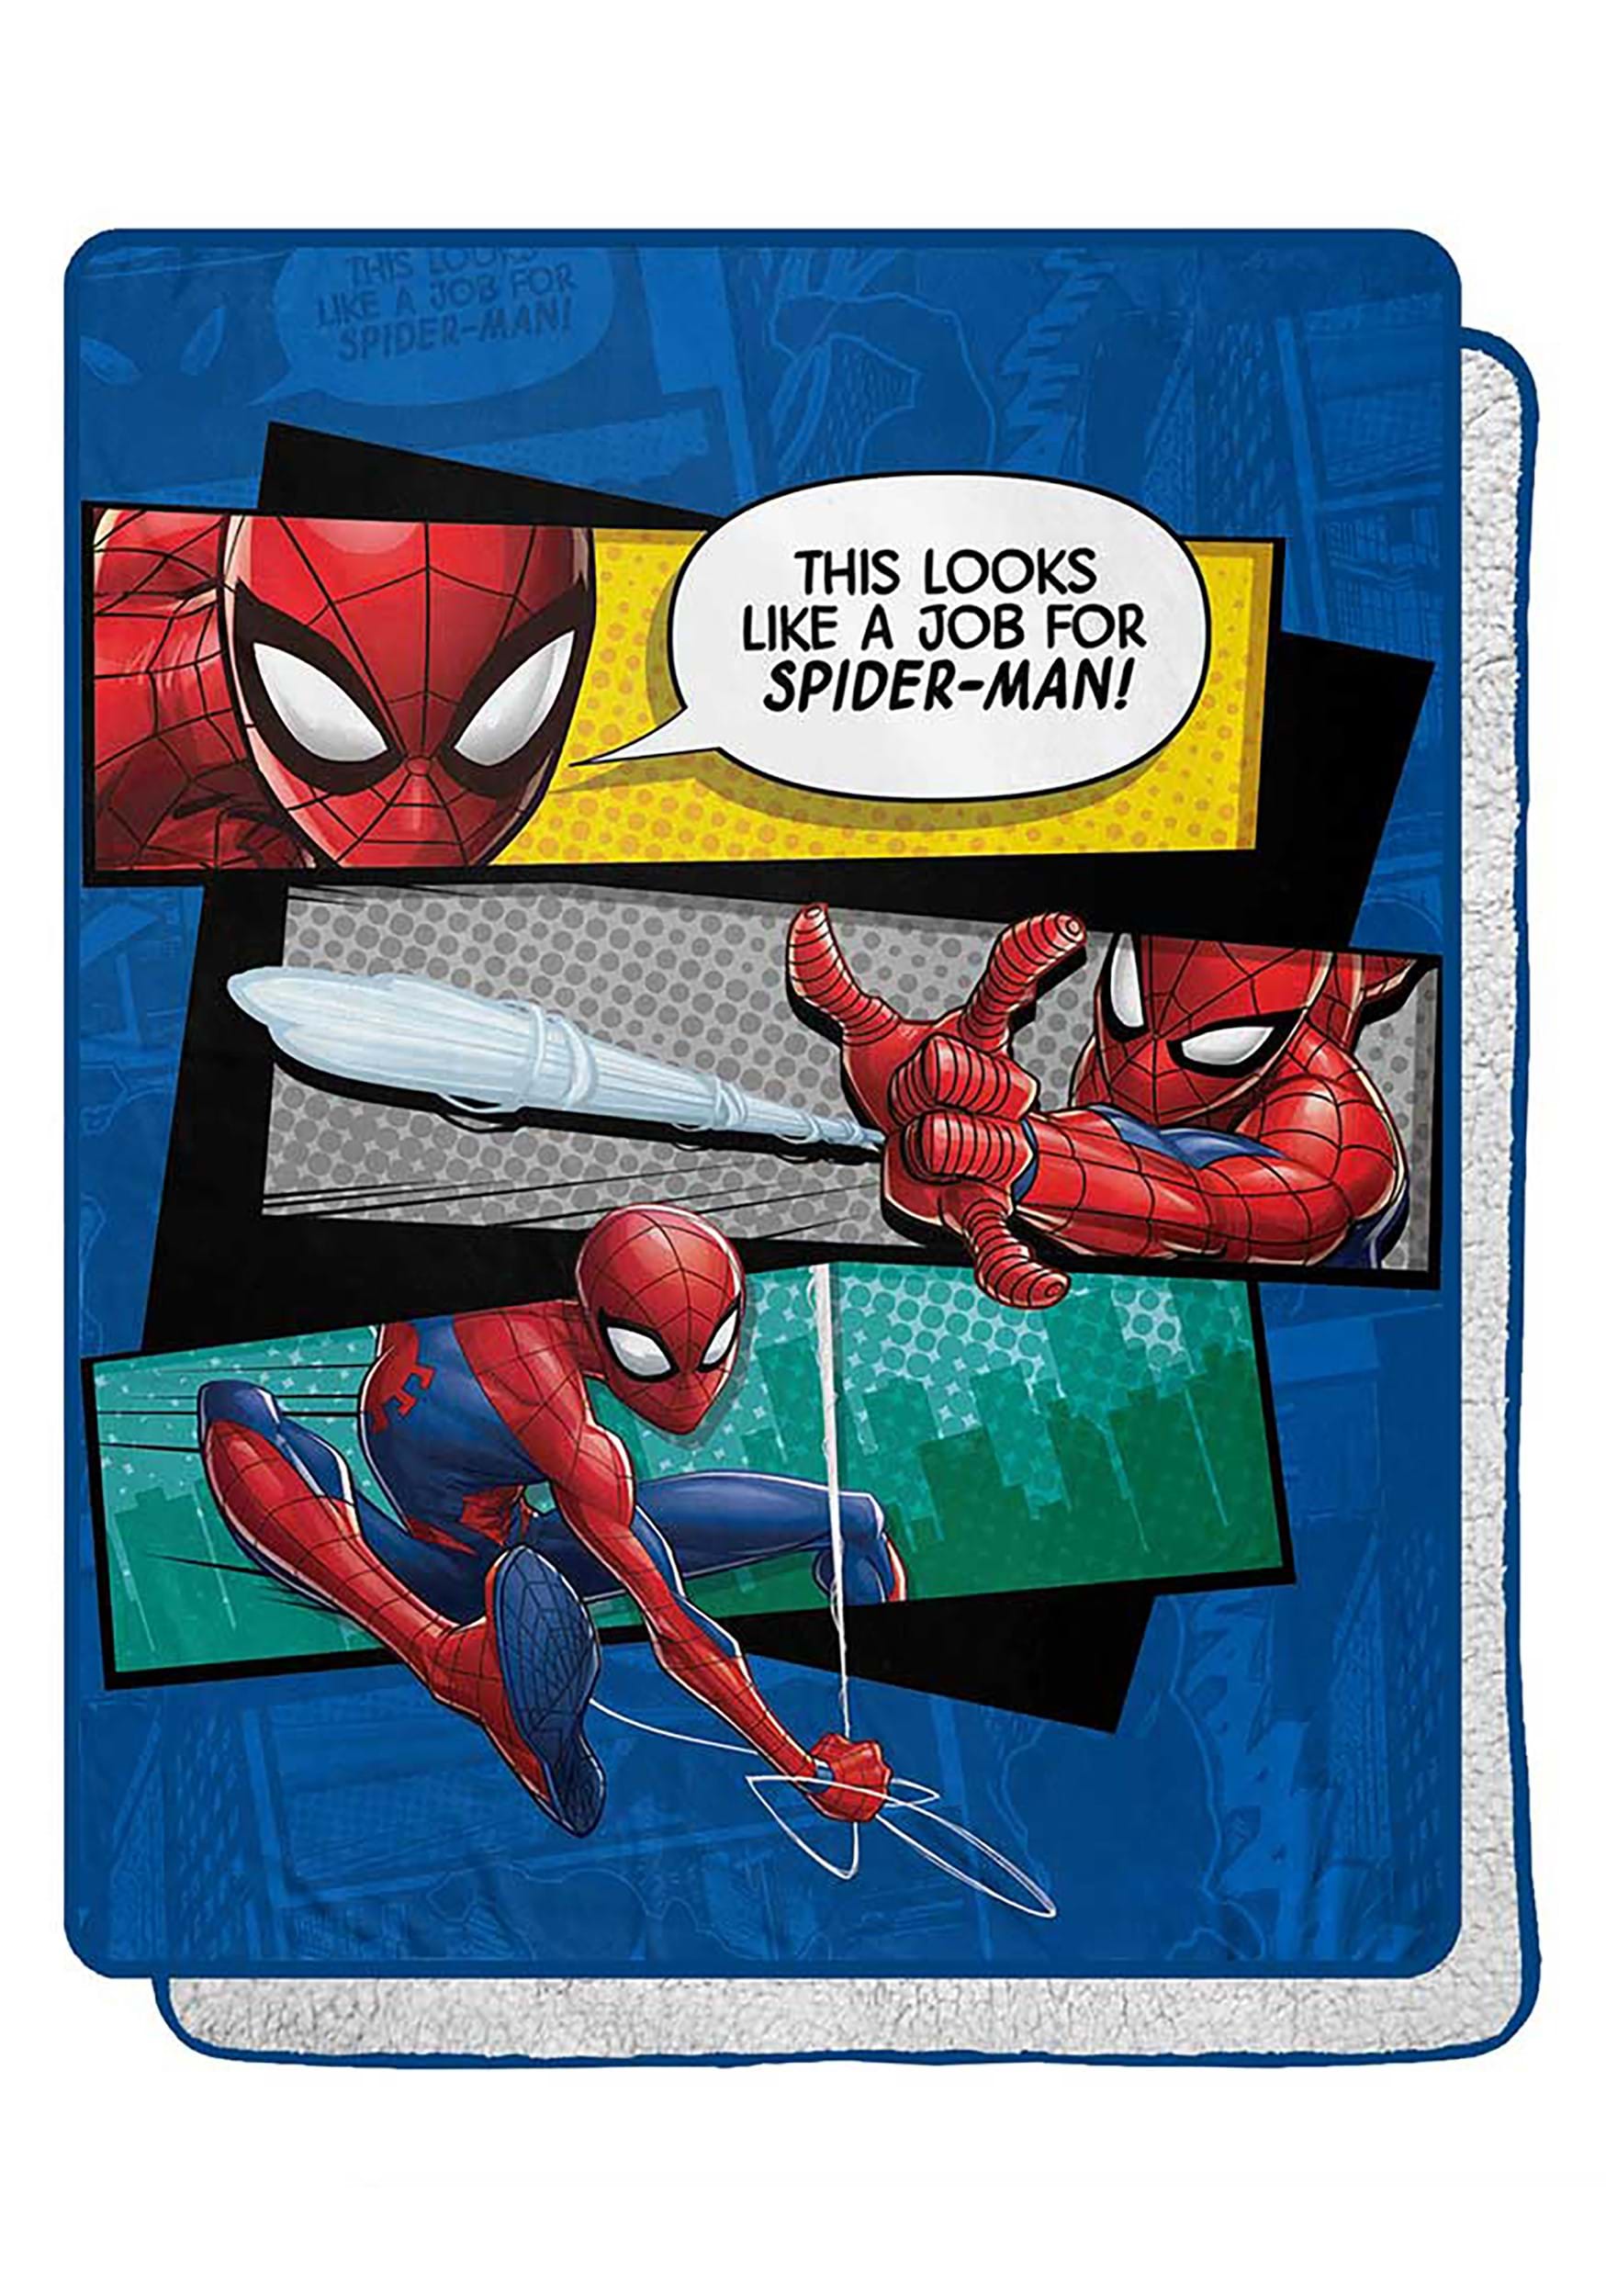 40"x50" Marvel Spider-Man "This Looks Like A Job For Spider-Man!" Sherpa Blanket